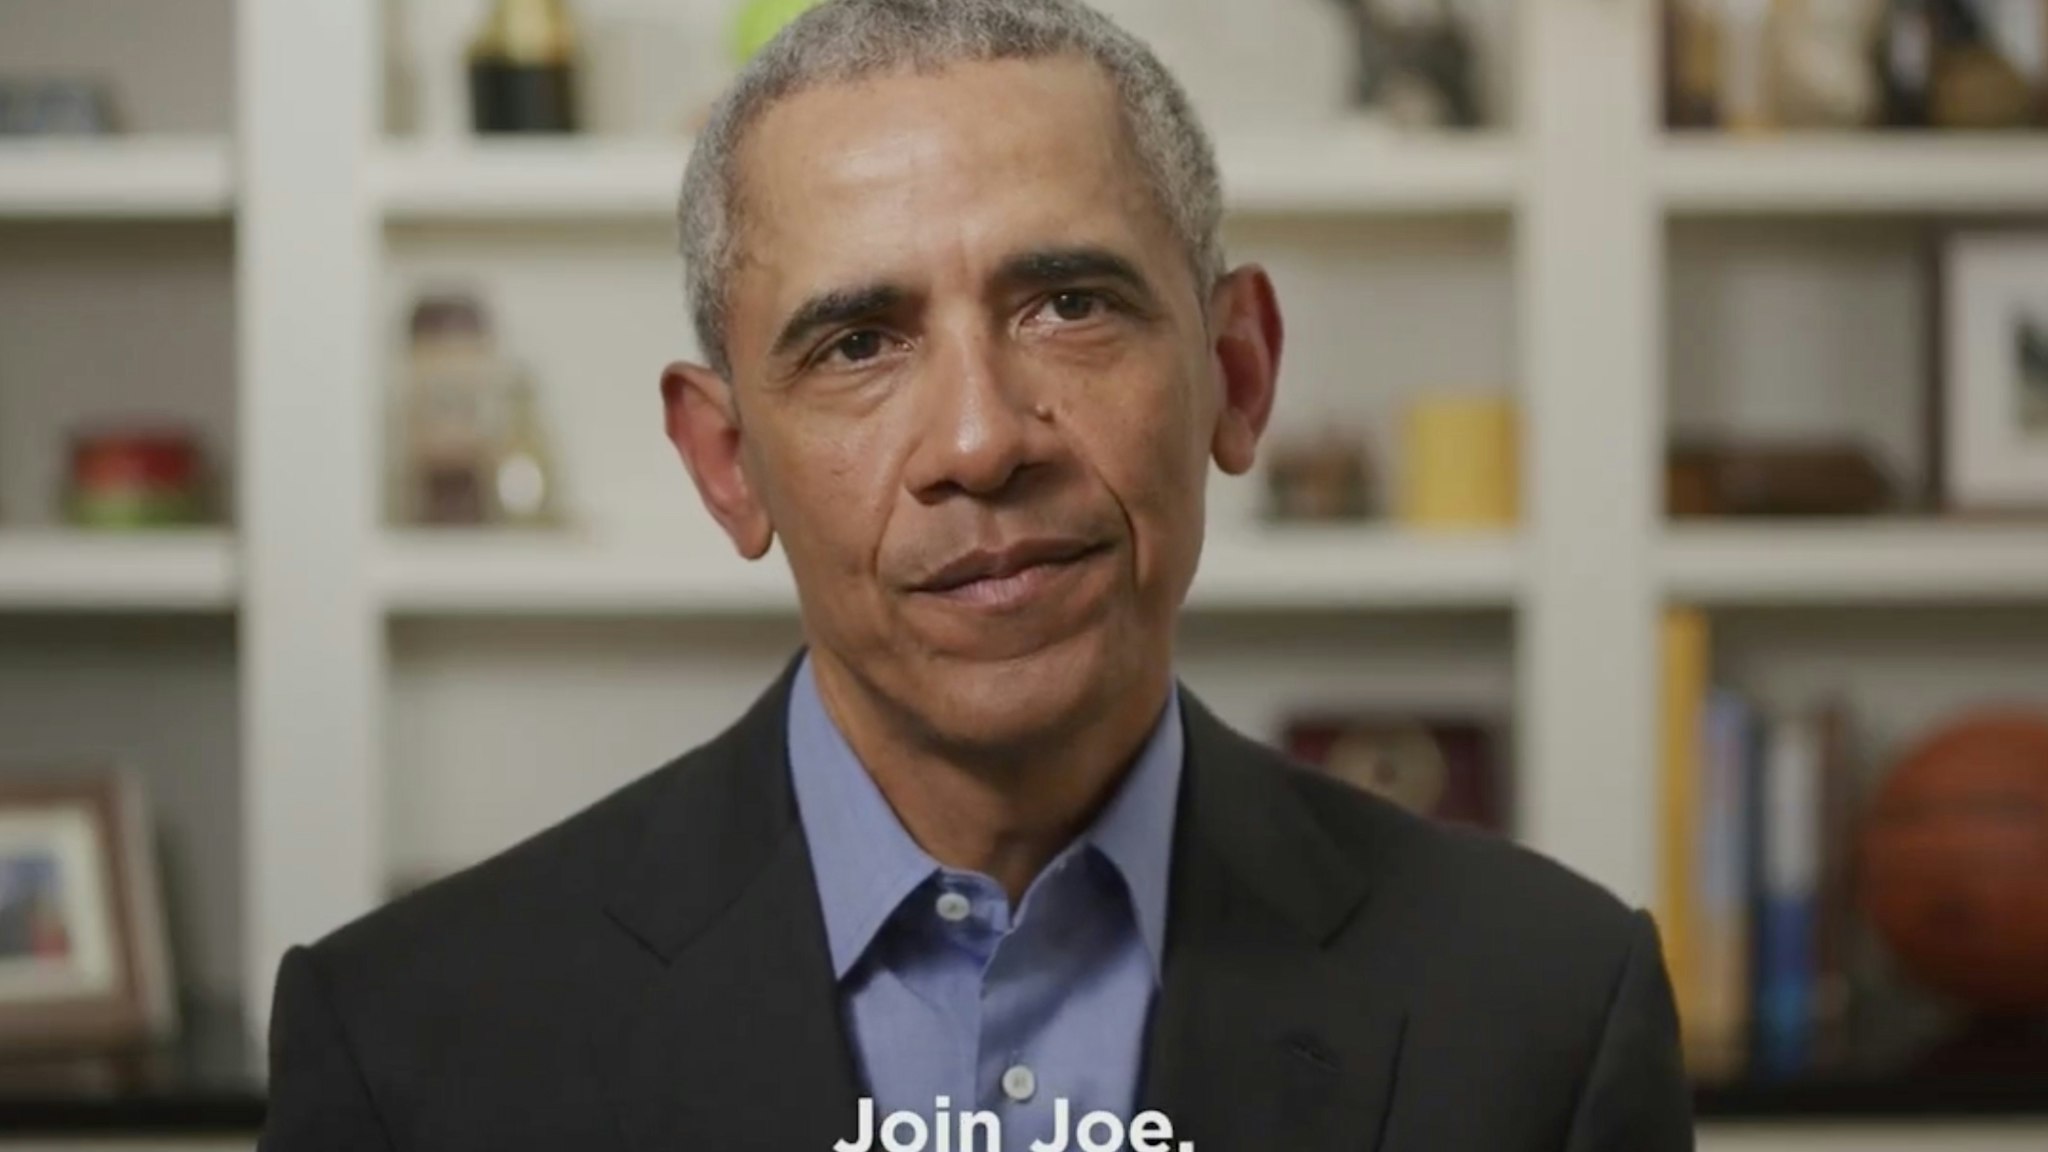 UNKNOWN LOCATION - APRIL 14: In this screengrab taken from Twitter.com, former U.S. President Barack Obama endorses Democratic presidential candidate former Vice President Joe Biden during a video released on April 14, 2020. (Photo by Twitter via Getty Images)